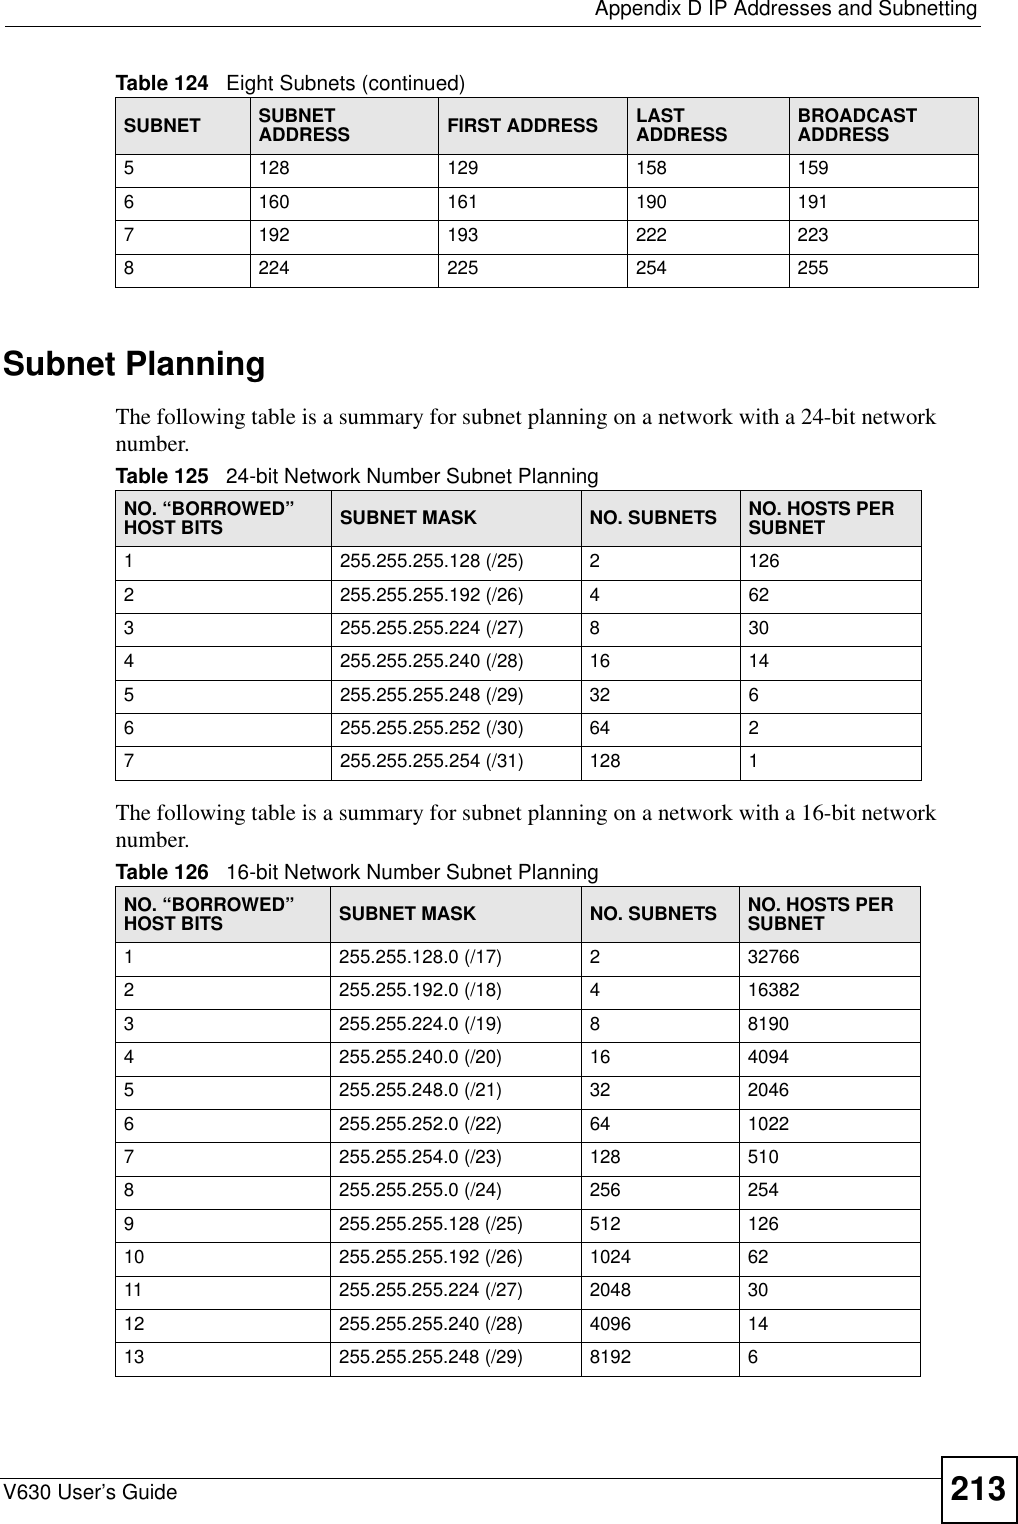  Appendix D IP Addresses and SubnettingV630 User’s Guide 213Subnet PlanningThe following table is a summary for subnet planning on a network with a 24-bit network number.The following table is a summary for subnet planning on a network with a 16-bit network number. 5128 129 158 1596160 161 190 1917192 193 222 2238224 225 254 255Table 124   Eight Subnets (continued)SUBNET SUBNET ADDRESS FIRST ADDRESS LAST ADDRESS BROADCAST ADDRESSTable 125   24-bit Network Number Subnet PlanningNO. “BORROWED” HOST BITS SUBNET MASK NO. SUBNETS NO. HOSTS PER SUBNET1255.255.255.128 (/25) 21262255.255.255.192 (/26) 4623255.255.255.224 (/27) 8304255.255.255.240 (/28) 16 145255.255.255.248 (/29) 32 66255.255.255.252 (/30) 64 27255.255.255.254 (/31) 128 1Table 126   16-bit Network Number Subnet PlanningNO. “BORROWED” HOST BITS SUBNET MASK NO. SUBNETS NO. HOSTS PER SUBNET1255.255.128.0 (/17) 2327662255.255.192.0 (/18) 4163823255.255.224.0 (/19) 881904255.255.240.0 (/20) 16 40945255.255.248.0 (/21) 32 20466255.255.252.0 (/22) 64 10227255.255.254.0 (/23) 128 5108255.255.255.0 (/24) 256 2549255.255.255.128 (/25) 512 12610 255.255.255.192 (/26) 1024 6211 255.255.255.224 (/27) 2048 3012 255.255.255.240 (/28) 4096 1413 255.255.255.248 (/29) 8192 6